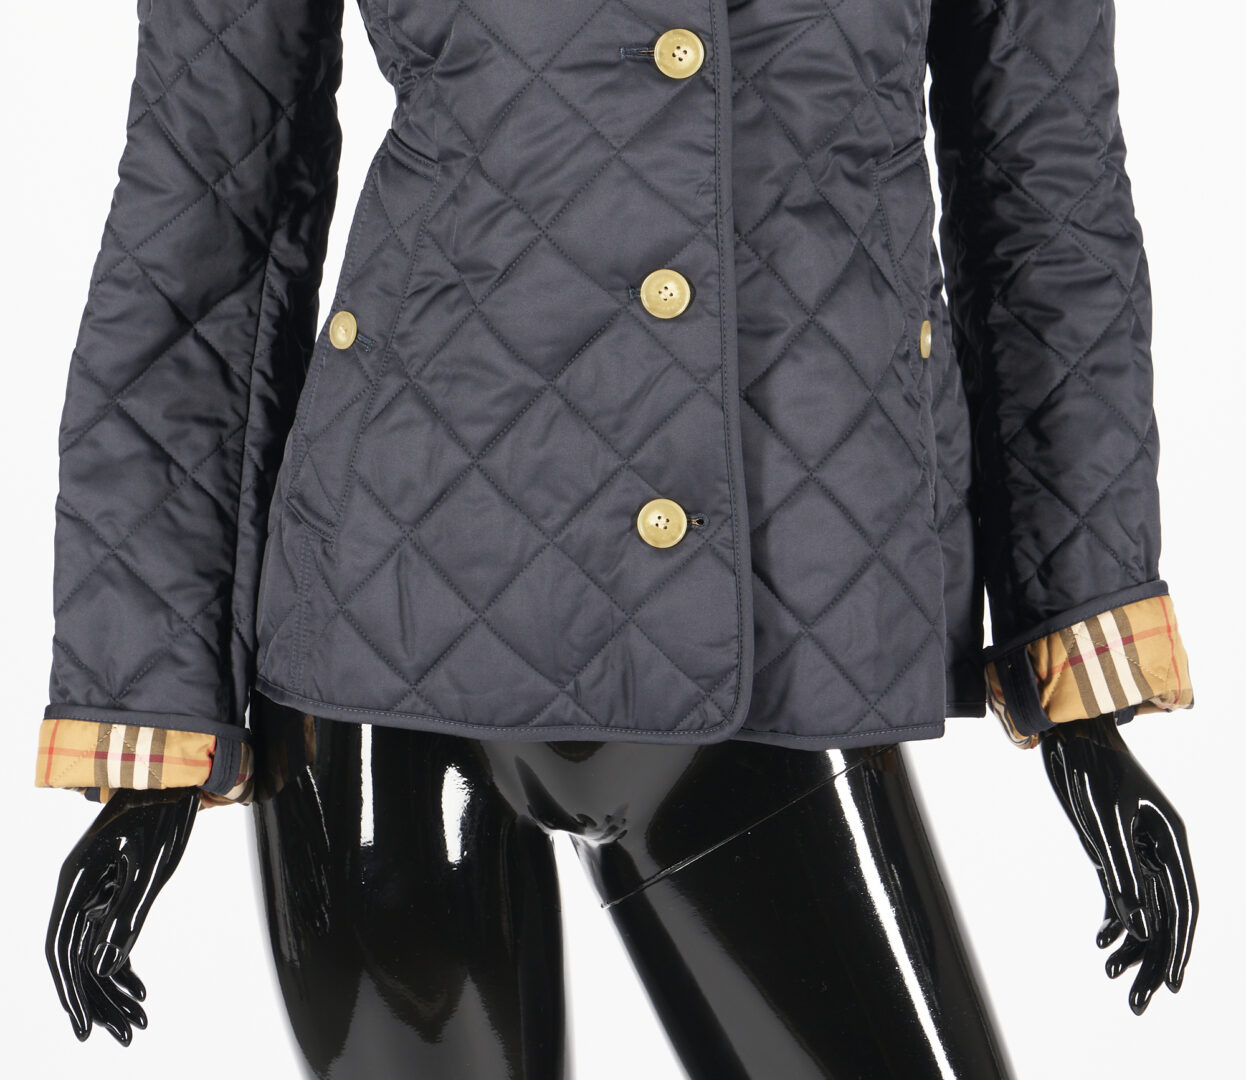 Lot 131: 3 Burberry Cold Weather Garments